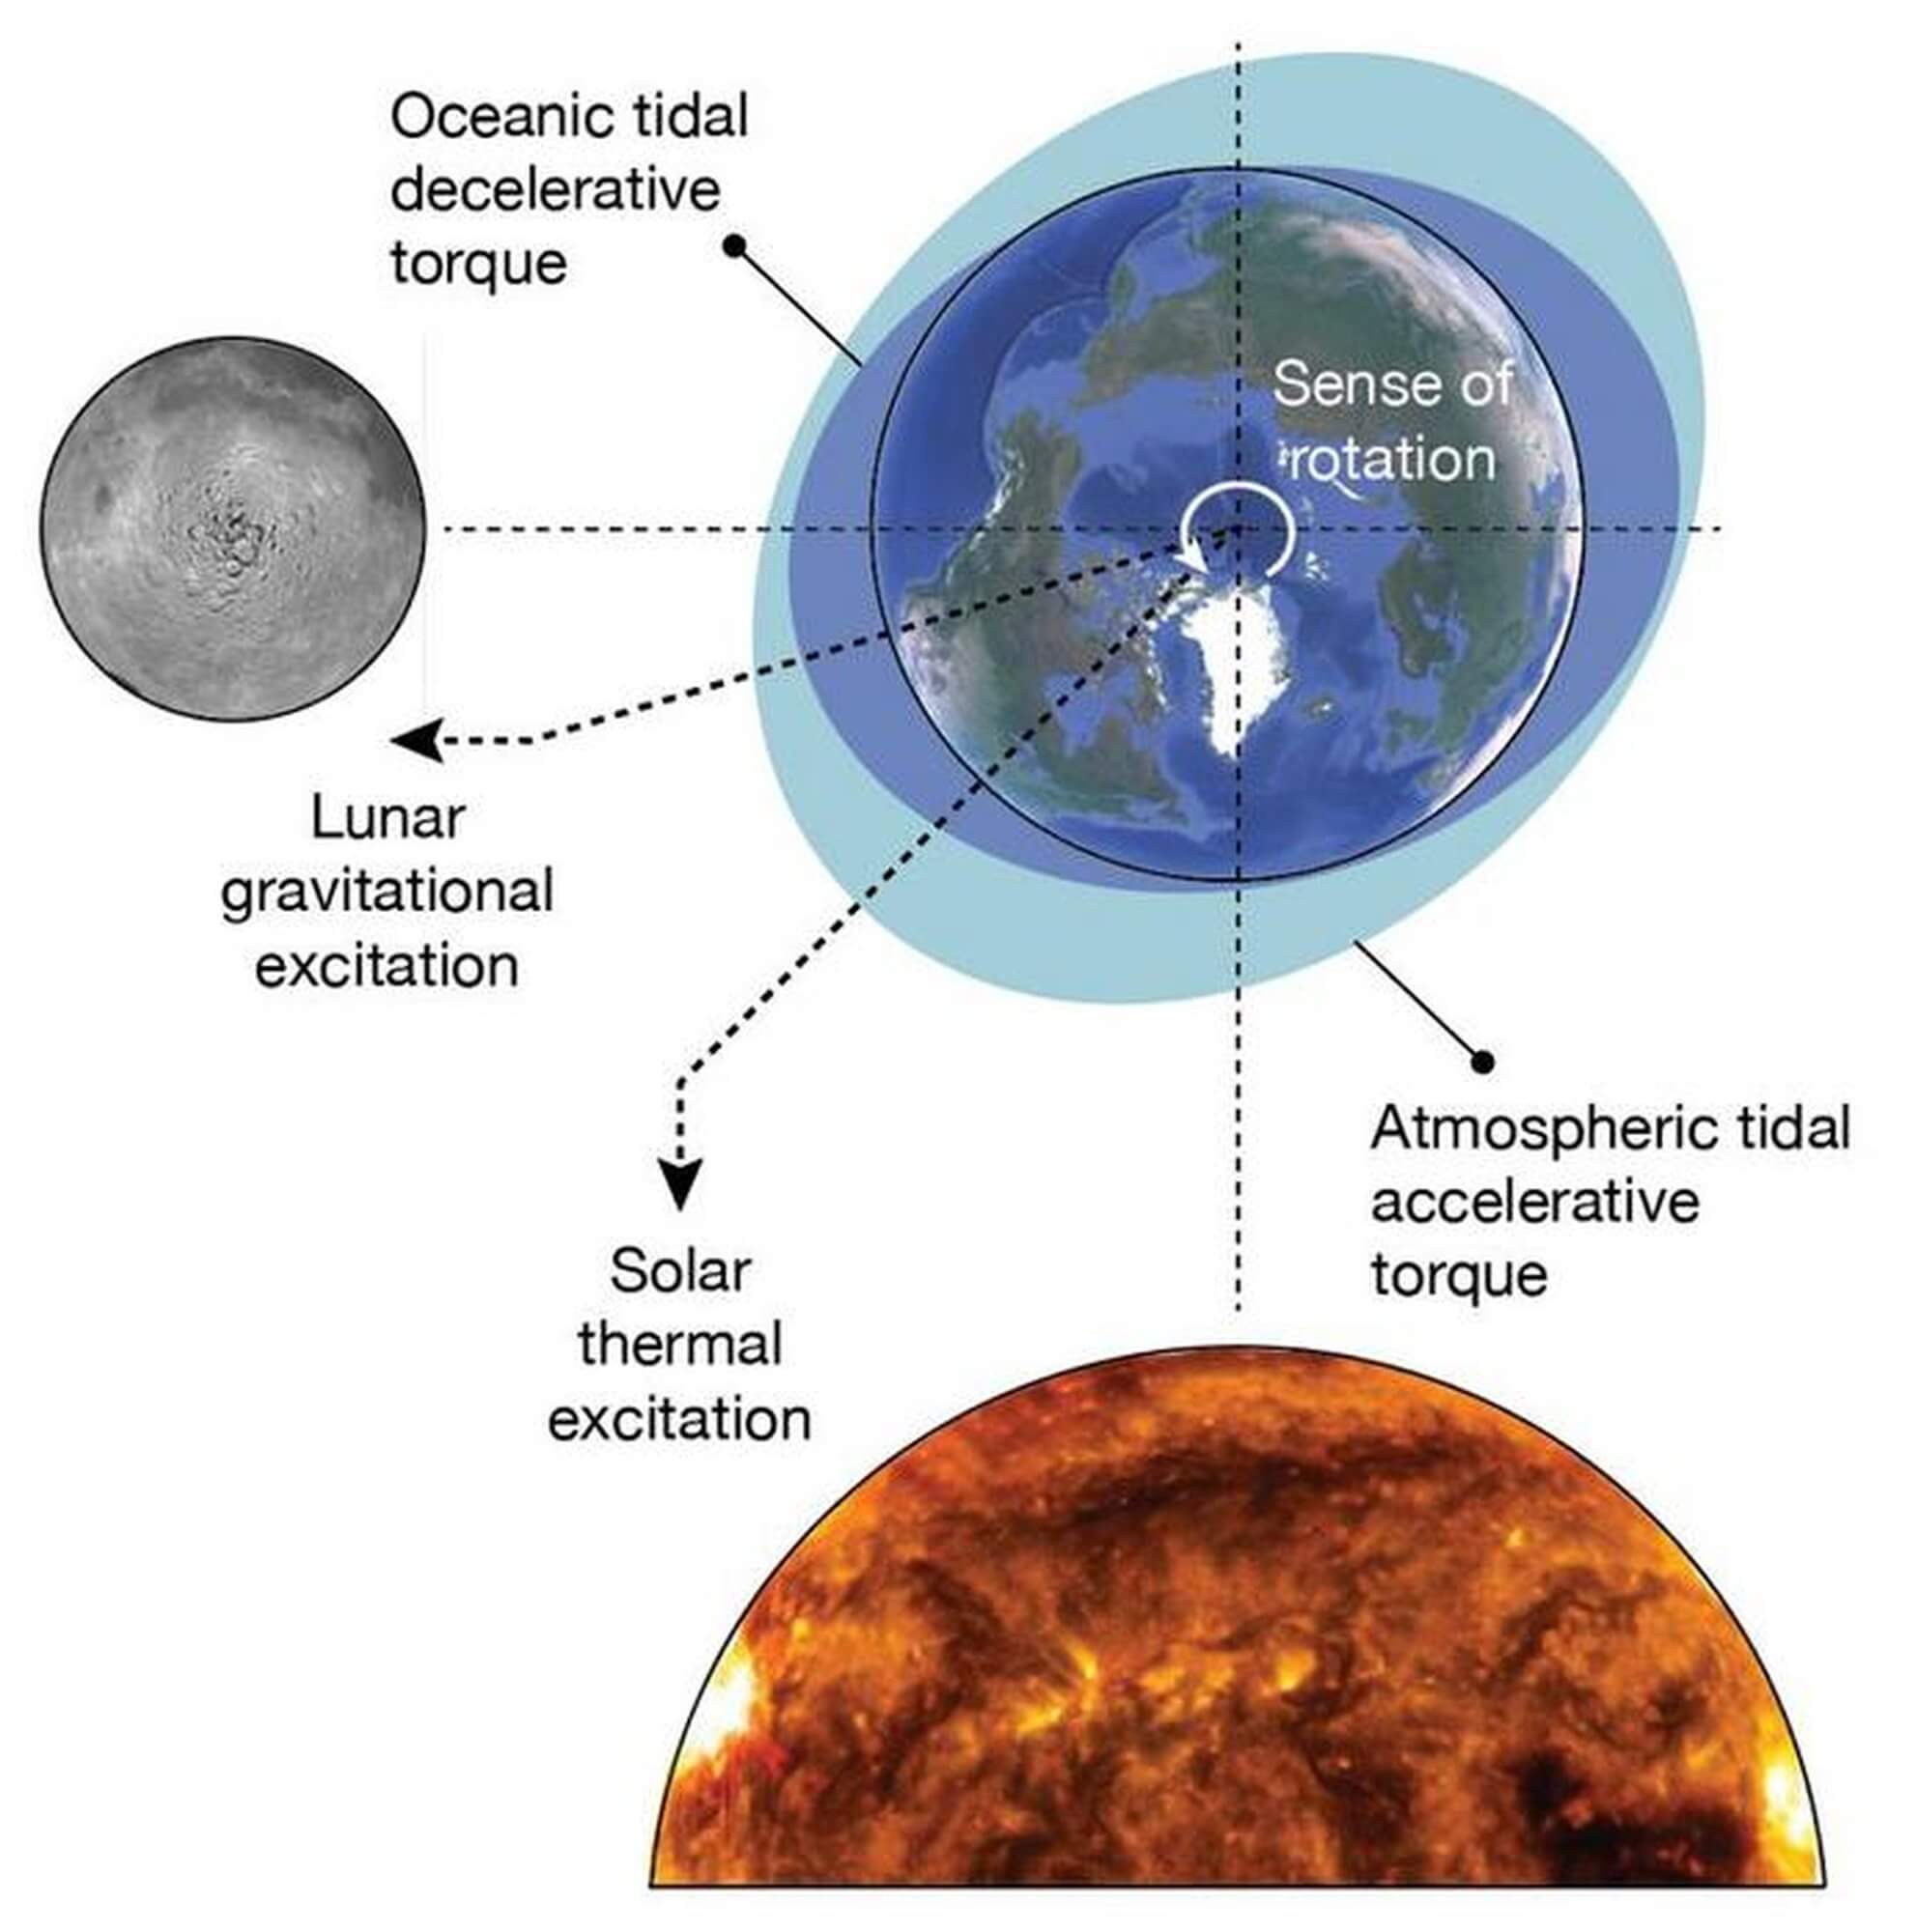 Illustration of Earth's opposing tides from the pull of the Moon and the push of the sun